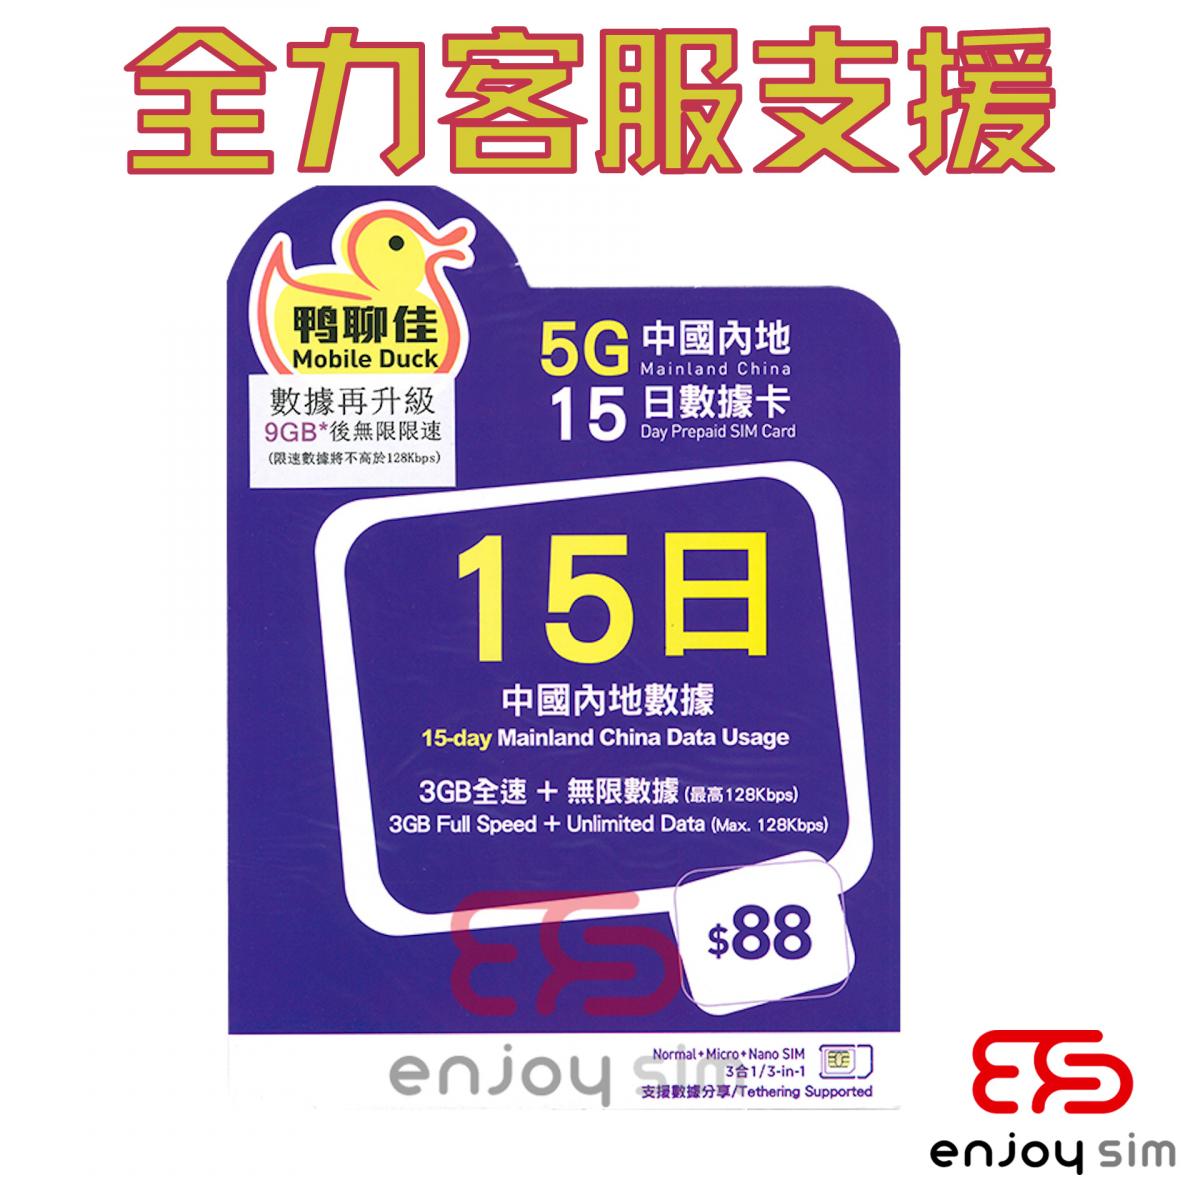 Mobile Duck【Mainland China】【15Days】5G/4G/3G Unlimited Data SIM Card (Random Packaging)